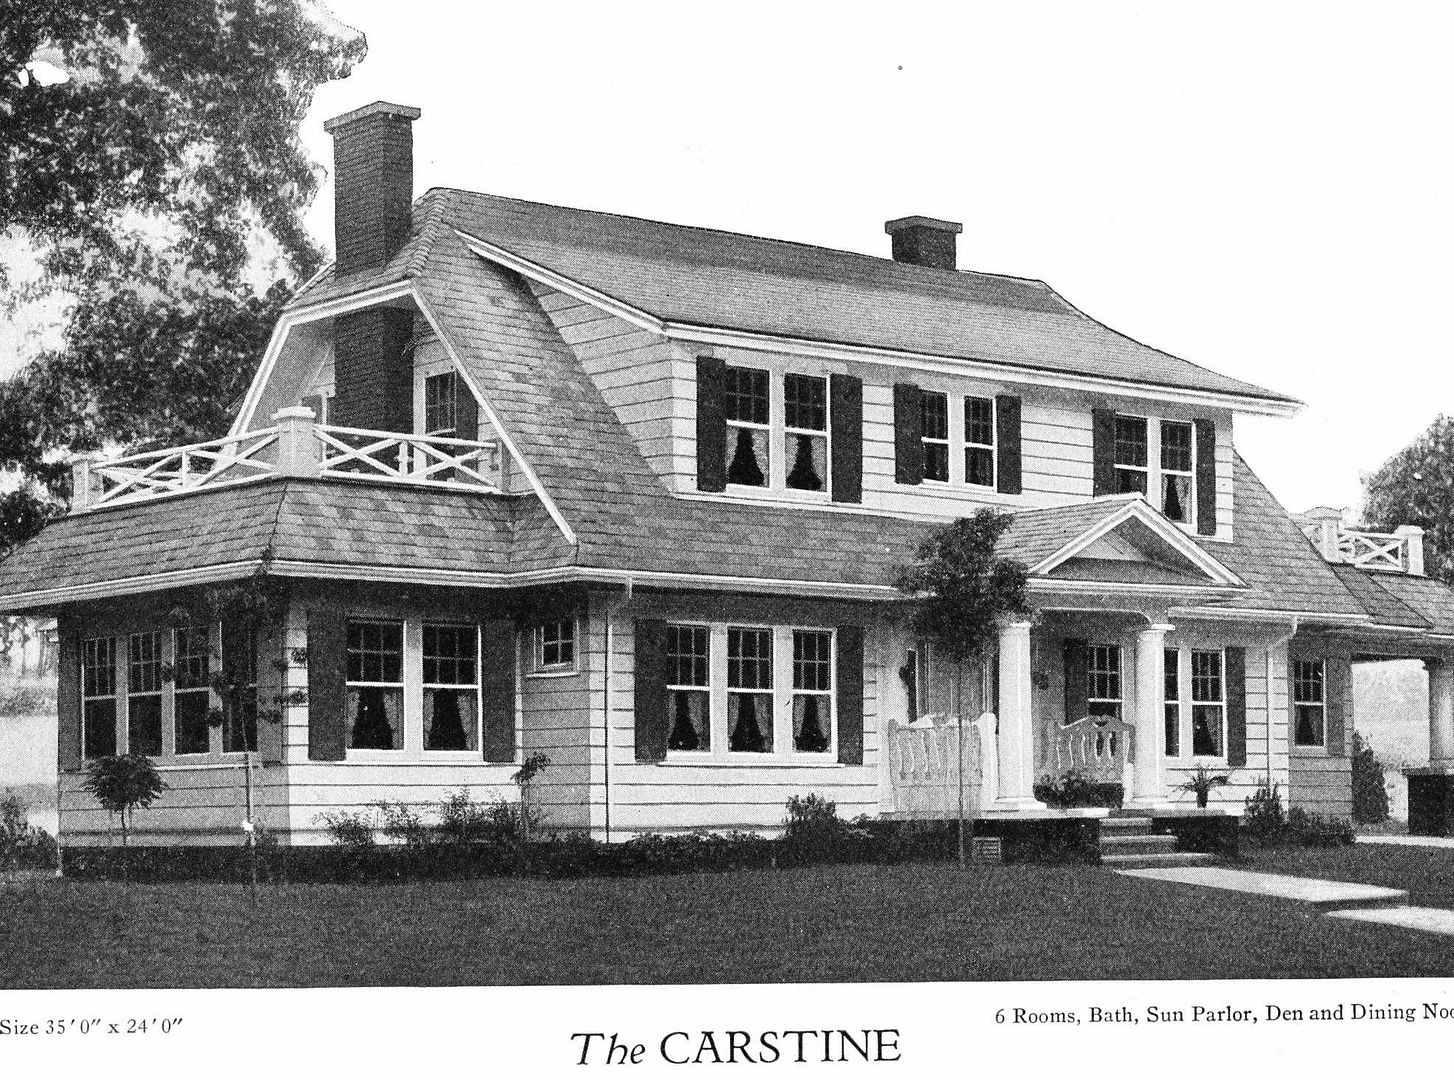 Heres the house as seen in the 1929 Home Builders catalog. 